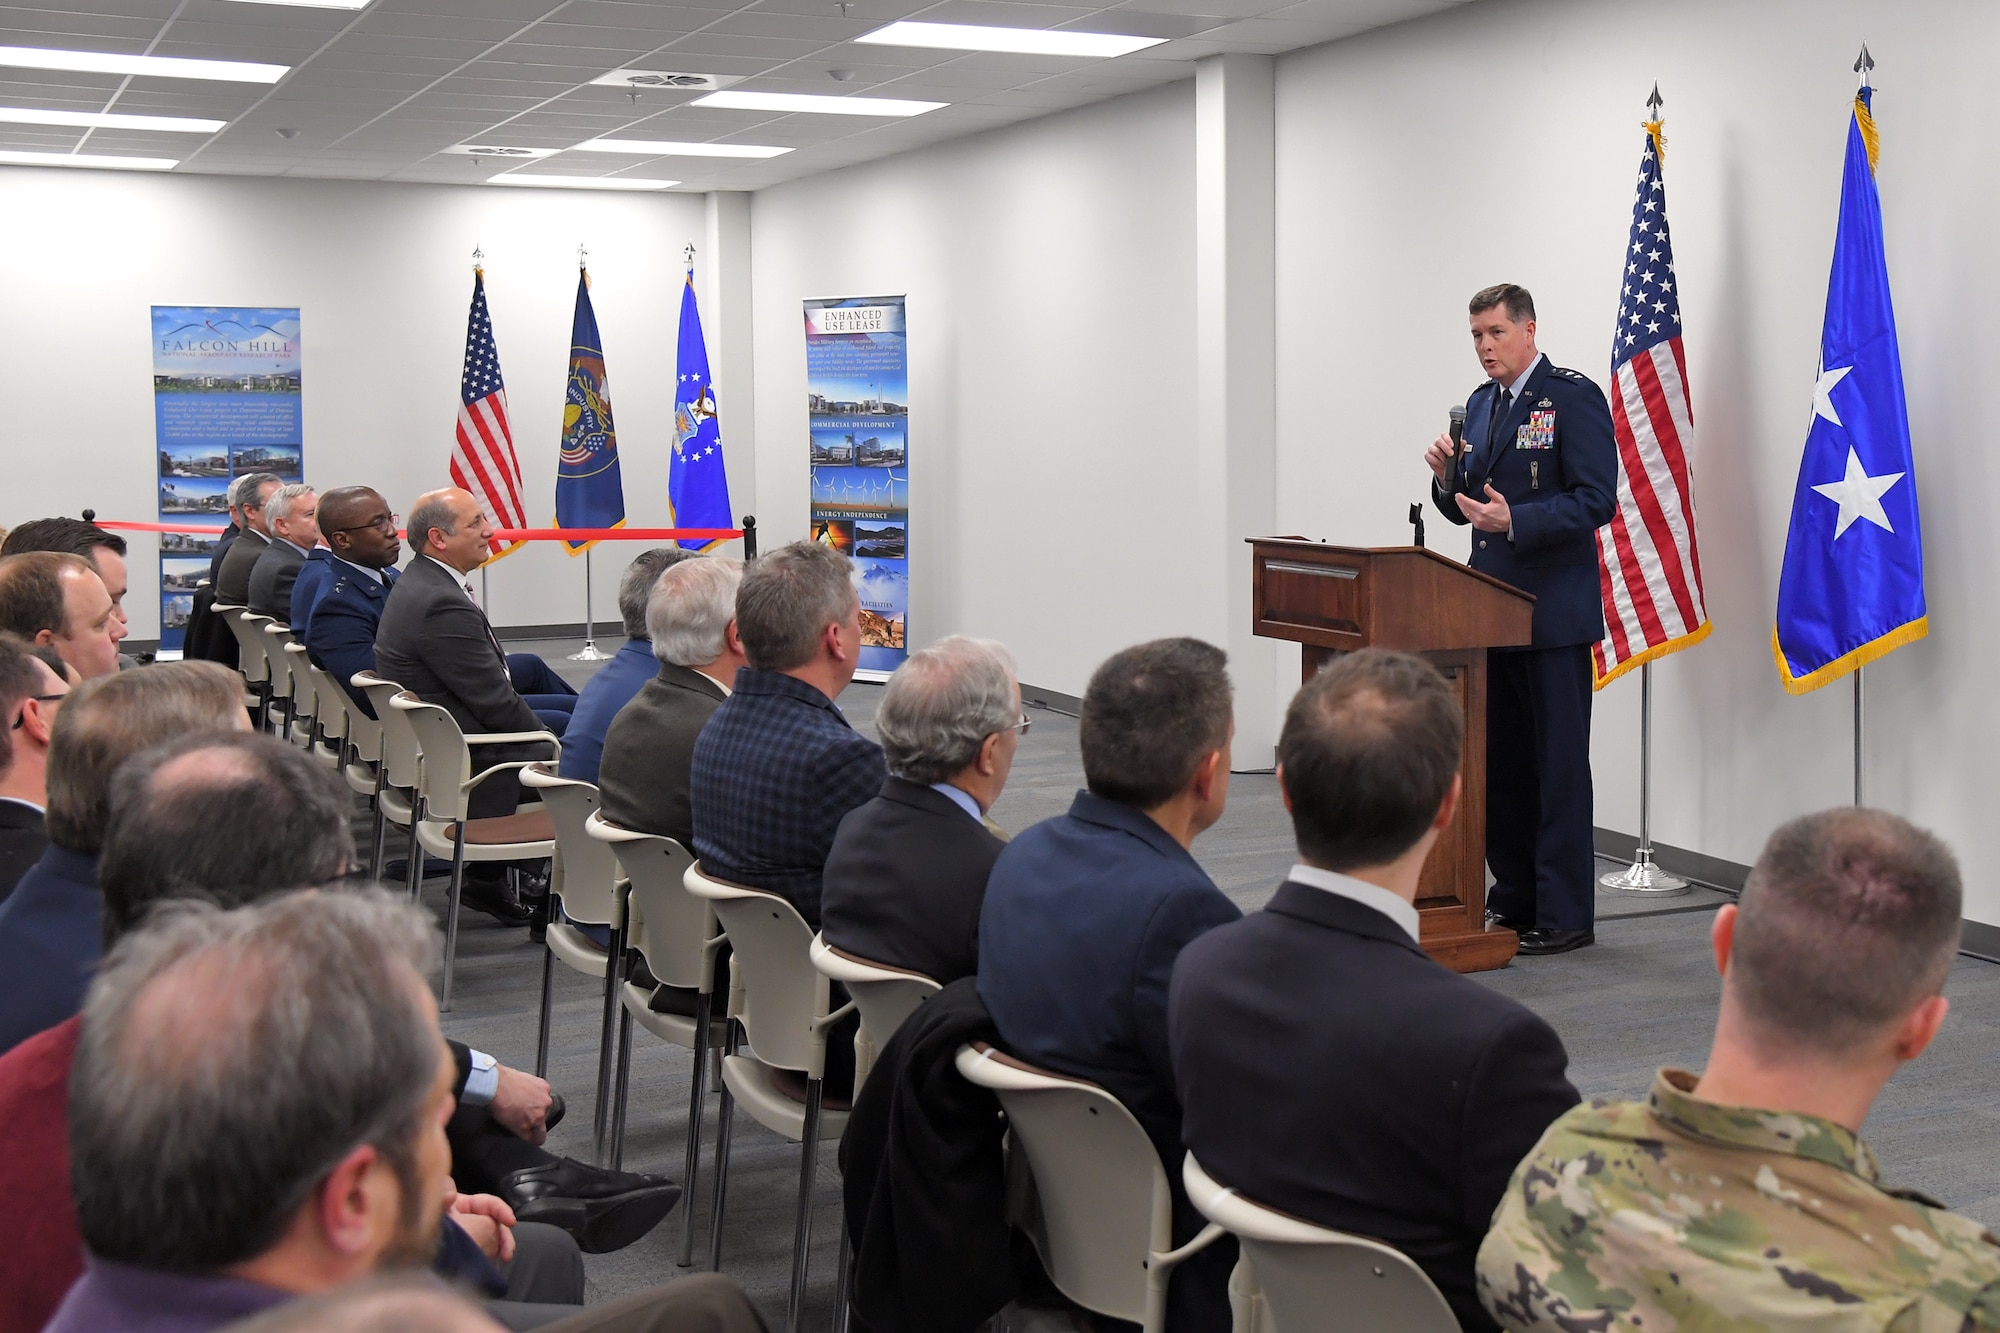 Lt. Gen. Gene Kirkland, Air Force Sustainment Center commander, discusses the importance of training and innovation with Airmen during a readiness exercise Feb. 7, 2019, at Hill Air Force Base, Utah.